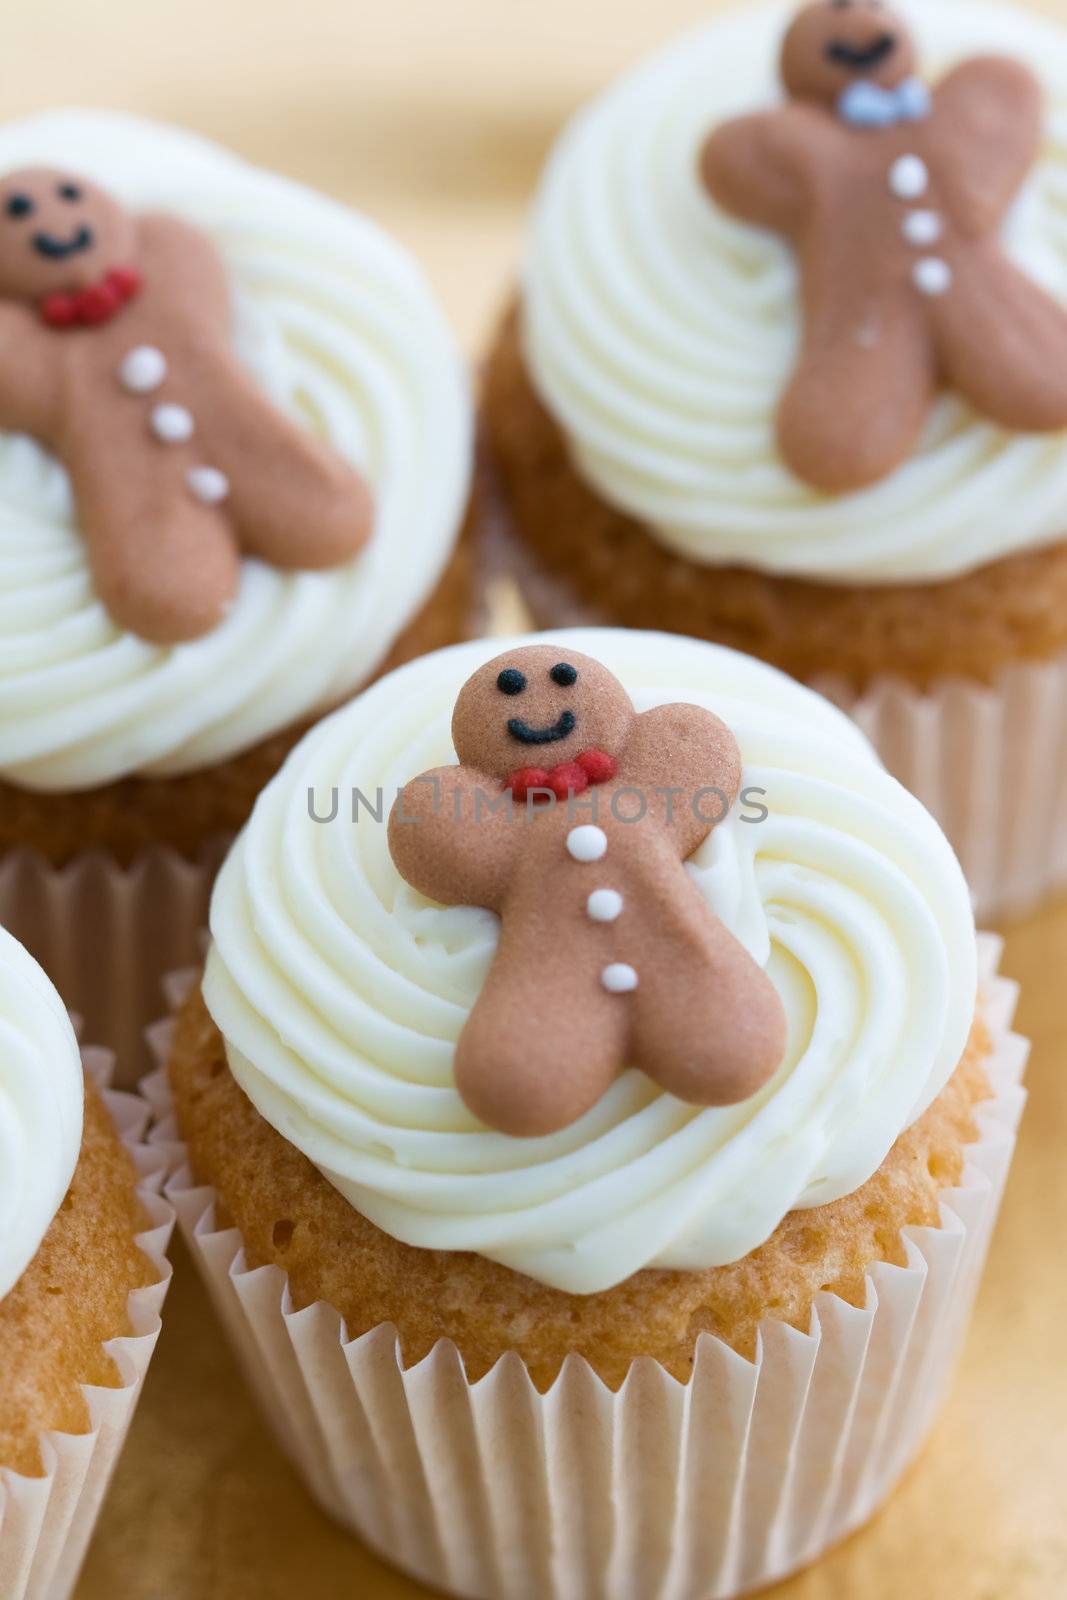 Mini cupcakes decorated with tiny gingerbread men